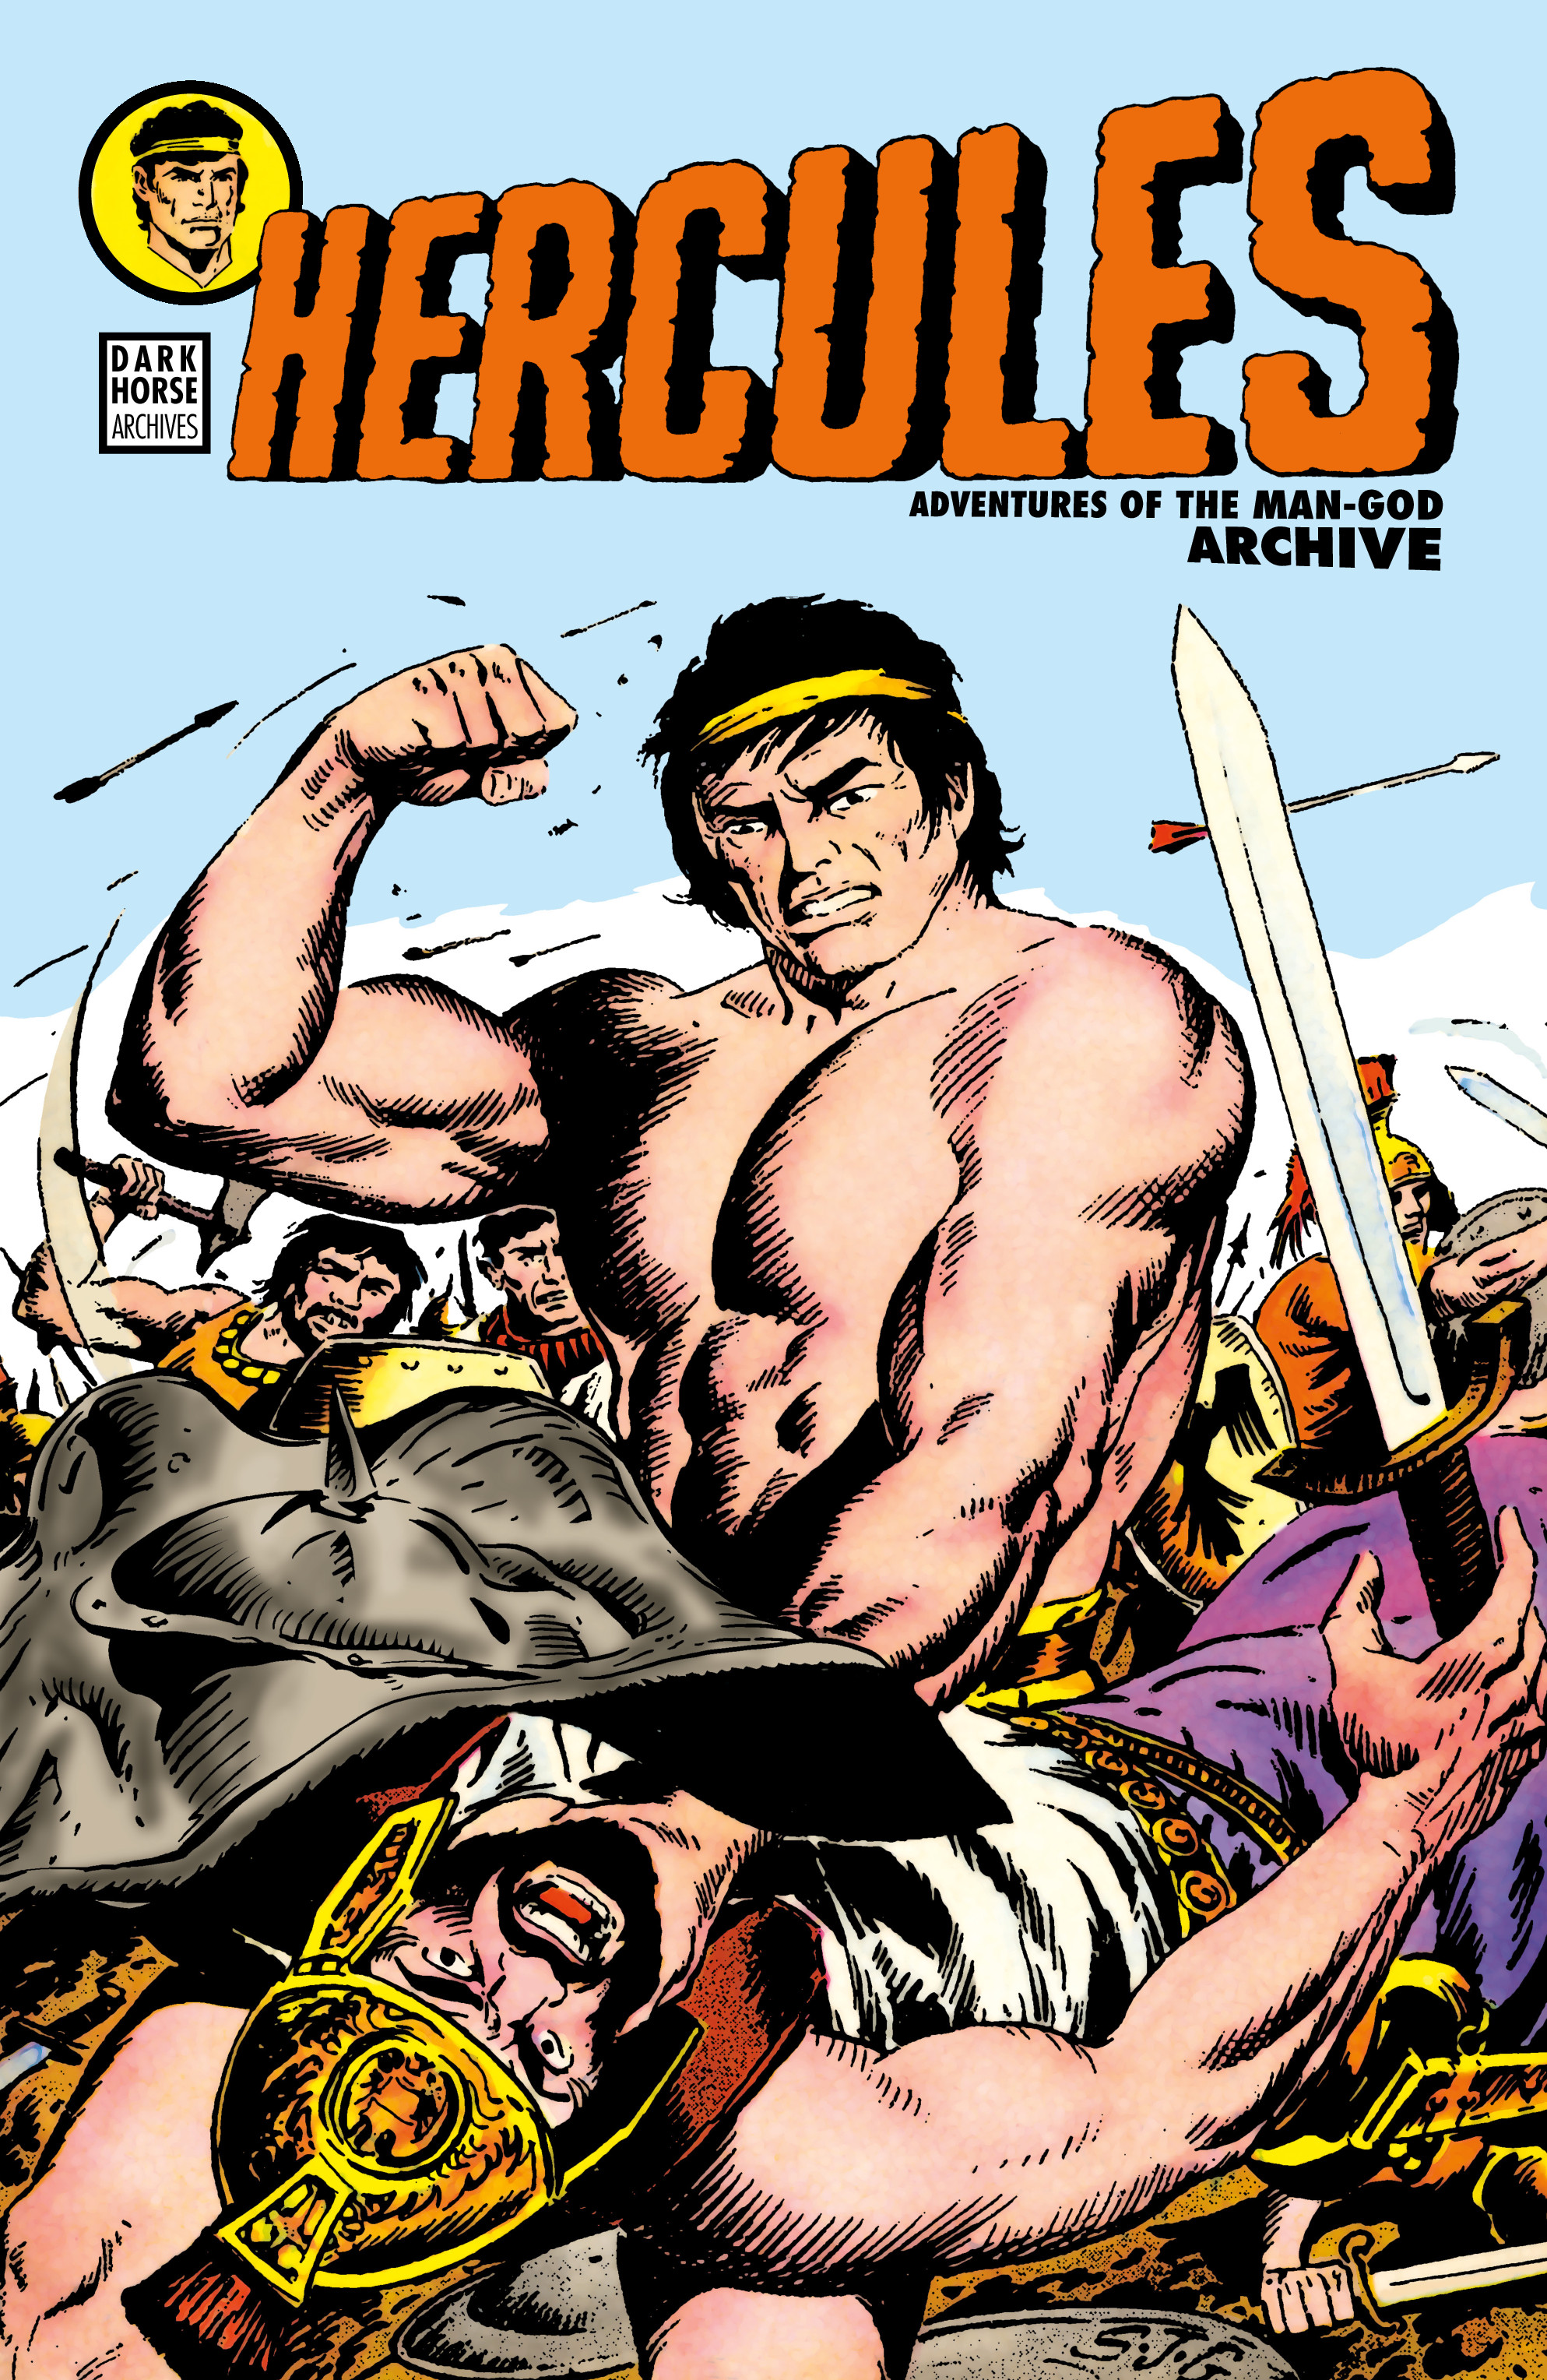 Read online Hercules: Adventures of the Man-God Archive comic -  Issue # TPB (Part 1) - 1